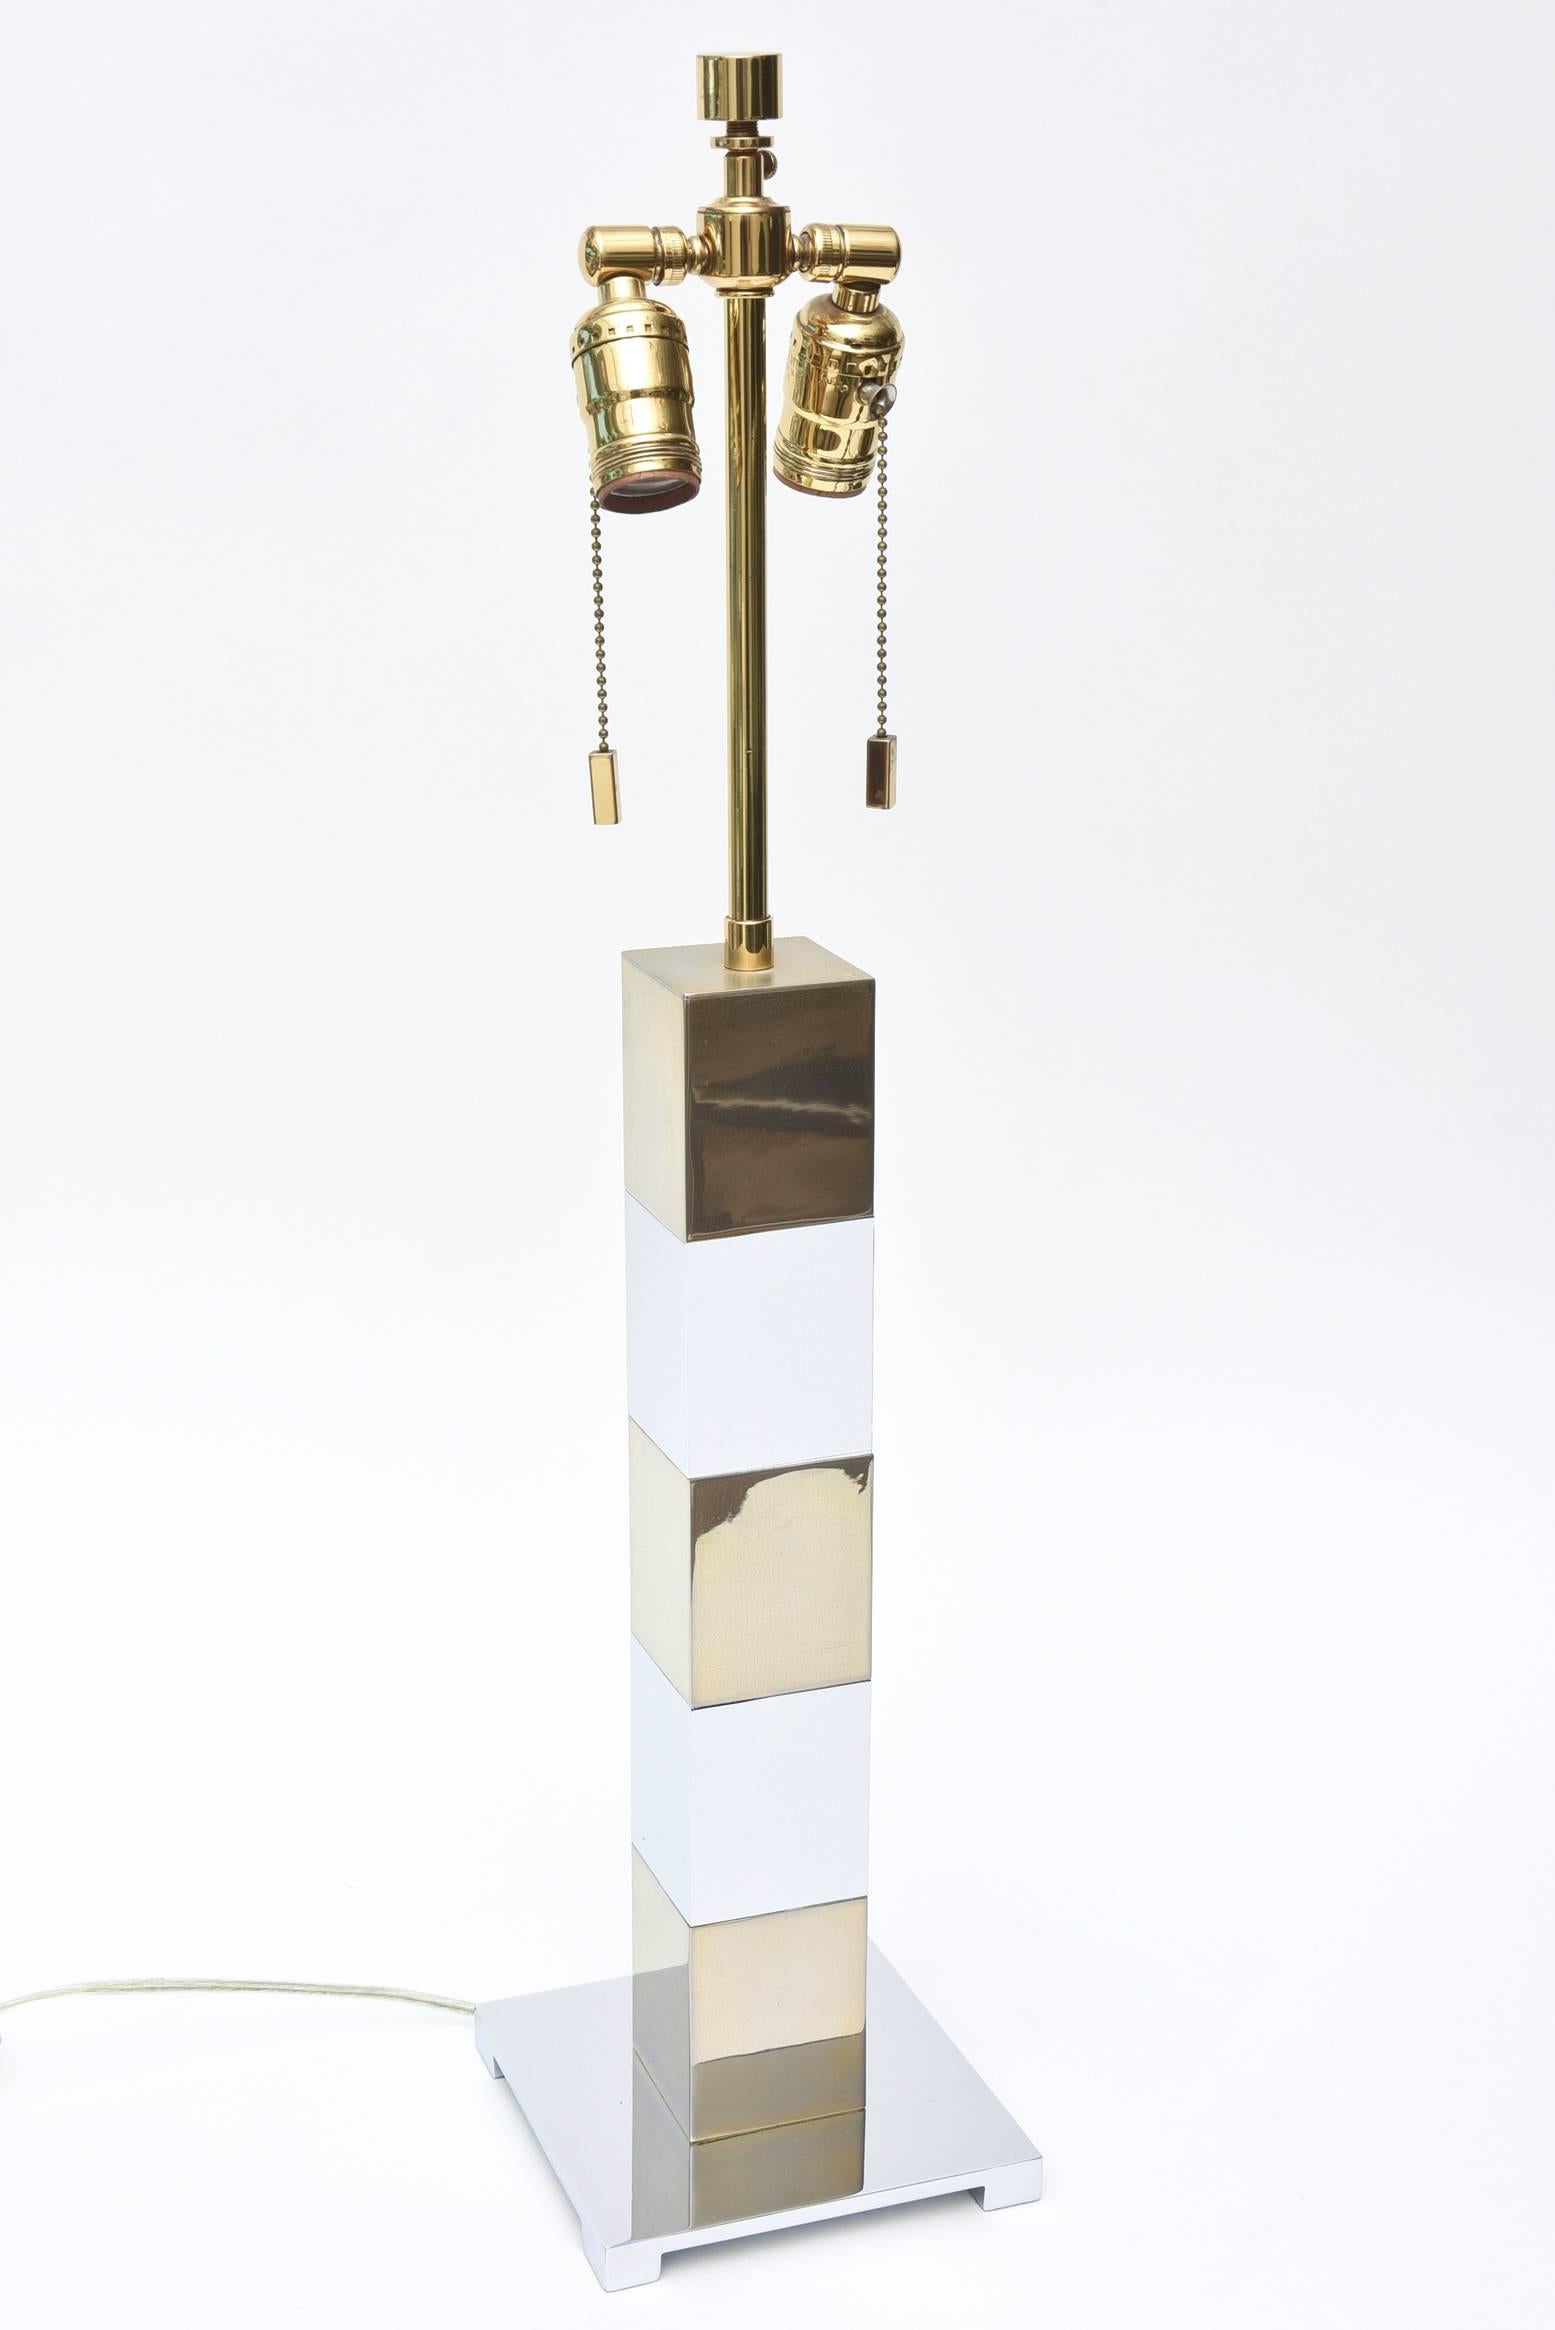 This modern table or desk lamp is in the style of Karl Springer. It has alternating chrome and brass cubes that sits on a chrome base. There are two pull chains for the double socket with the original finial. It is 28.5